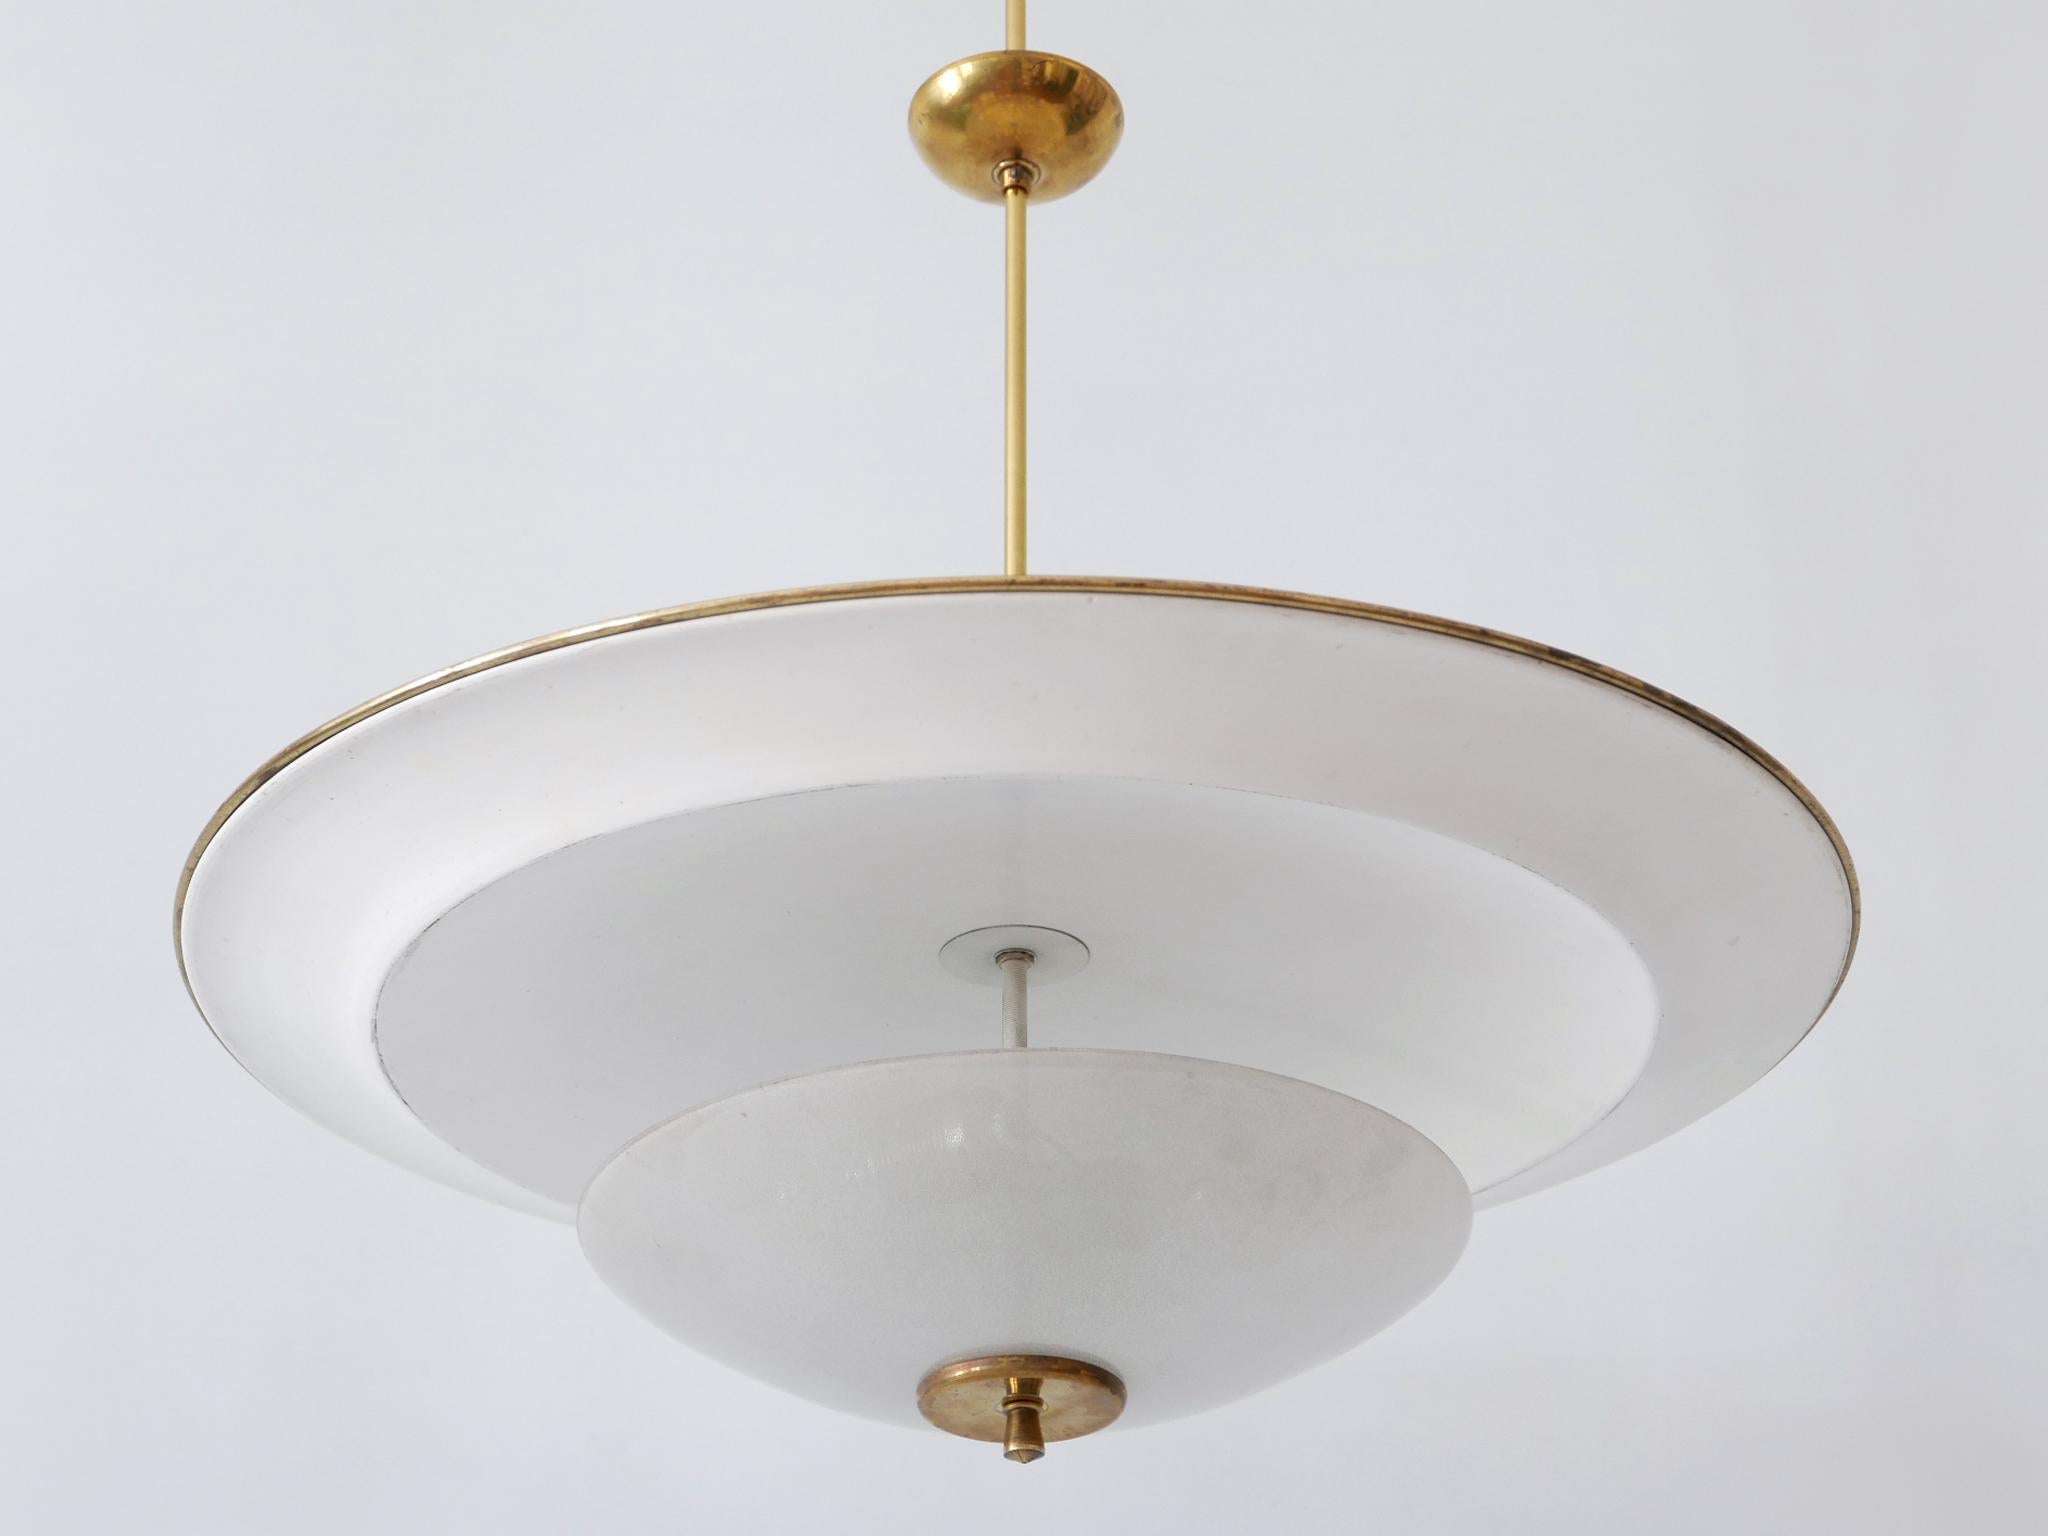 Large Mid-Century Modern 'Ufo' Ceiling Light or Pendant Lamp Germany 1950s № 2 For Sale 8